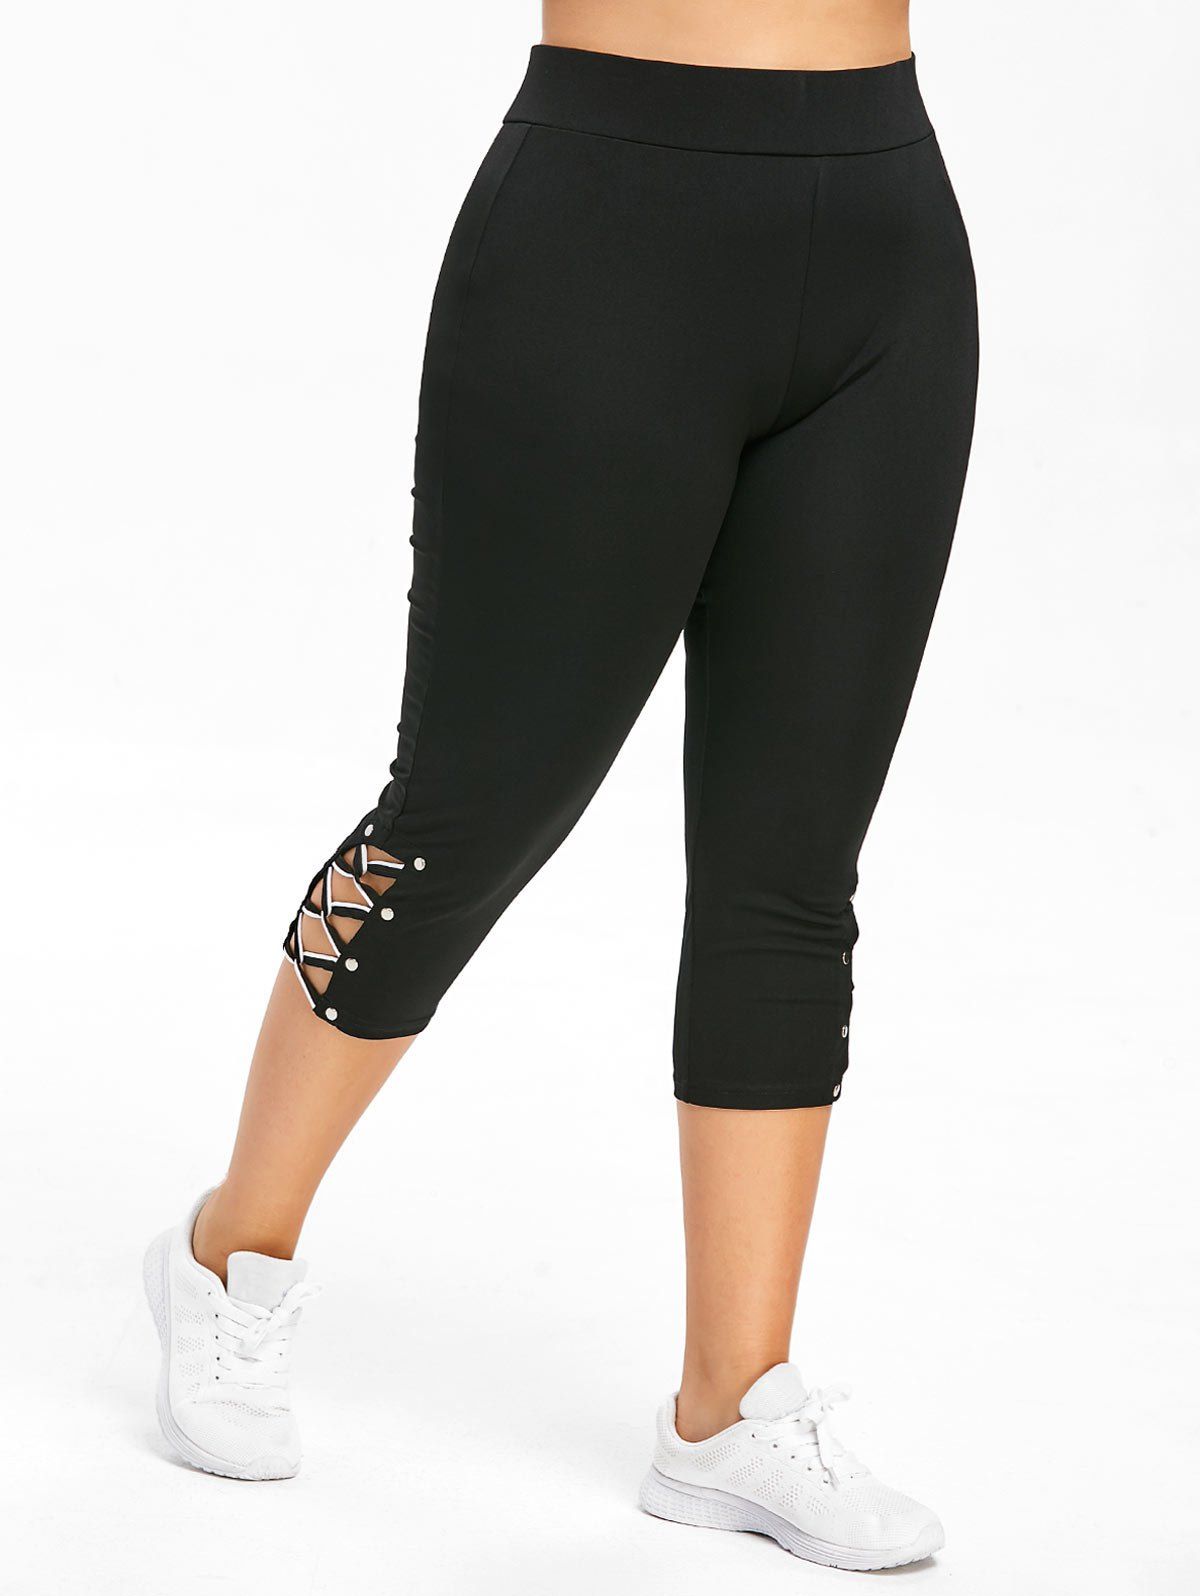  WE CUFFLLE Women's Plus Size Leggings High Waisted